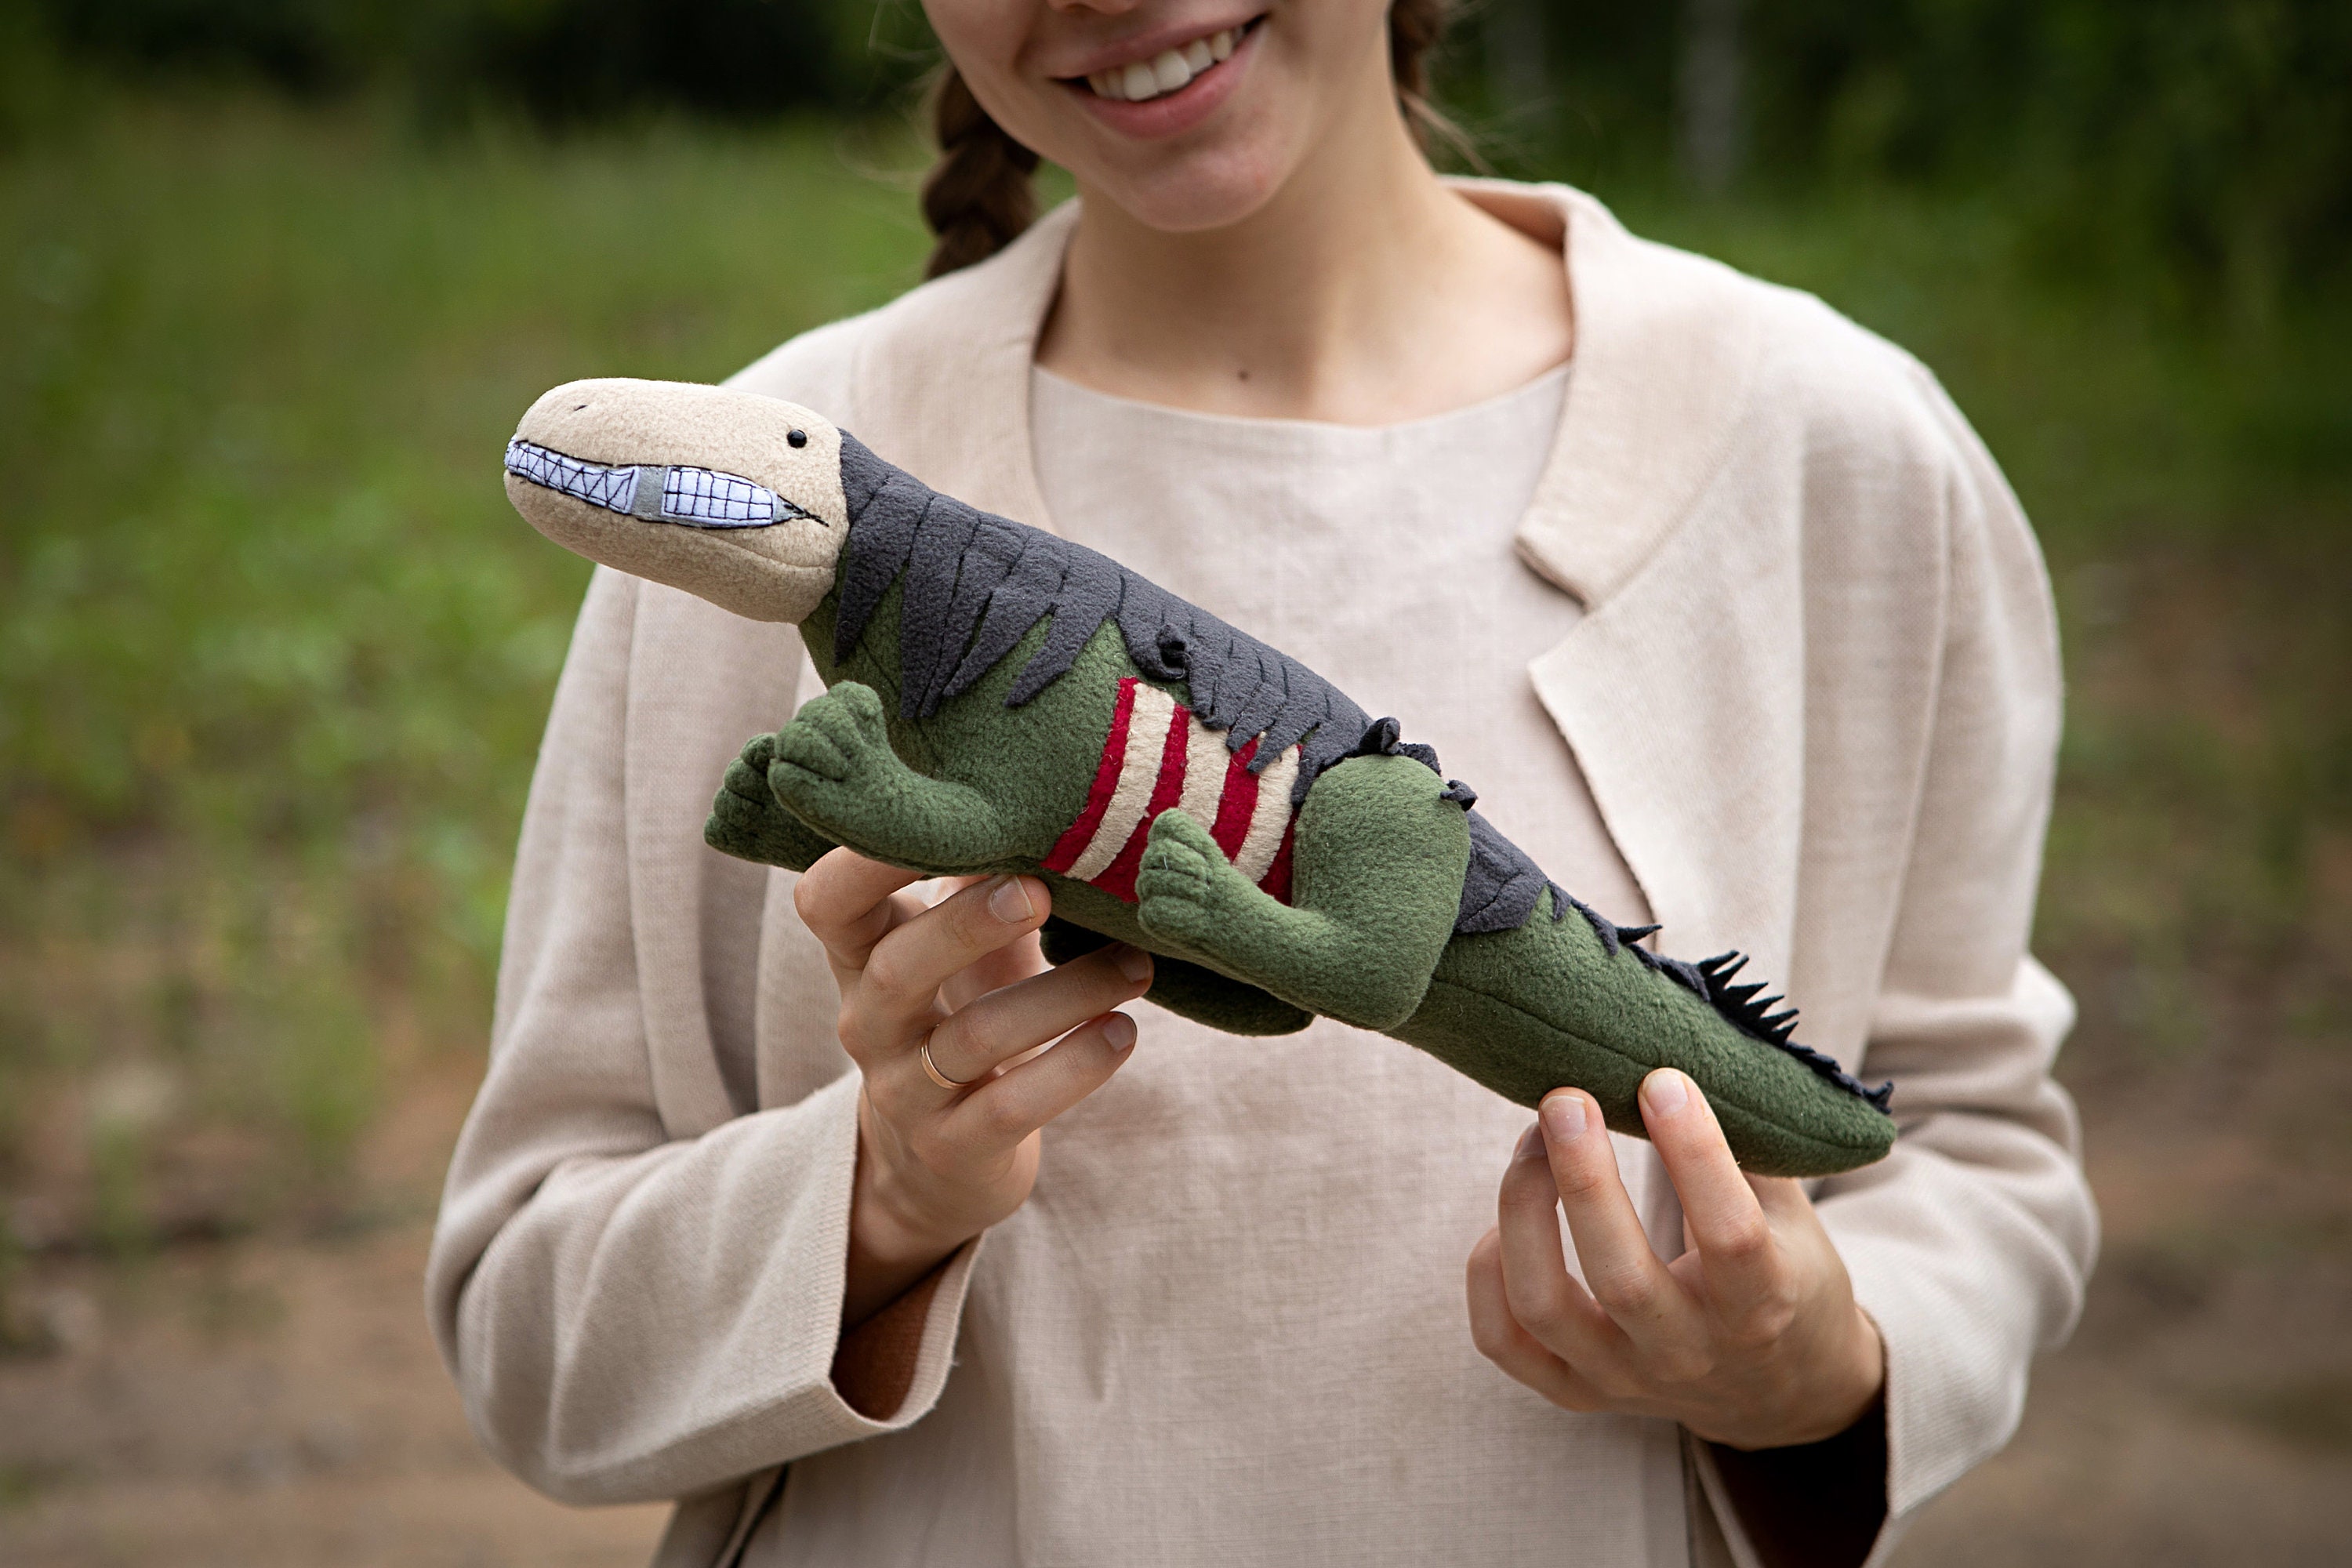 Handmade SCP-682 - Hard-To-Destroy Reptile (19 cm) Plush Toy Buy on